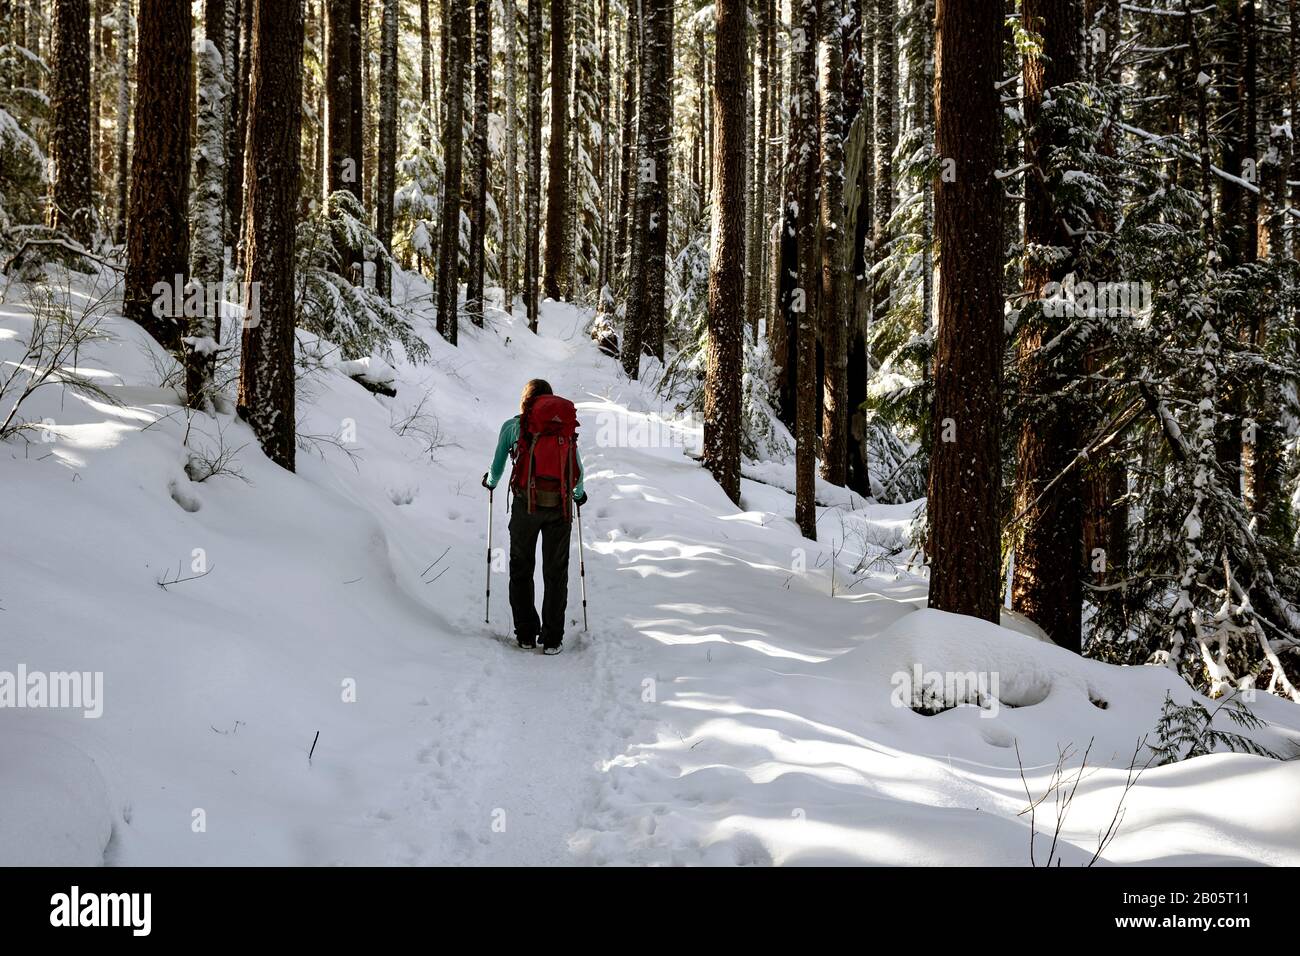 WA17170-00...WASHINGTON -  Hiker on the Tiger Mountain Trail in the Issaquah Alps. (MR# S1) Stock Photo